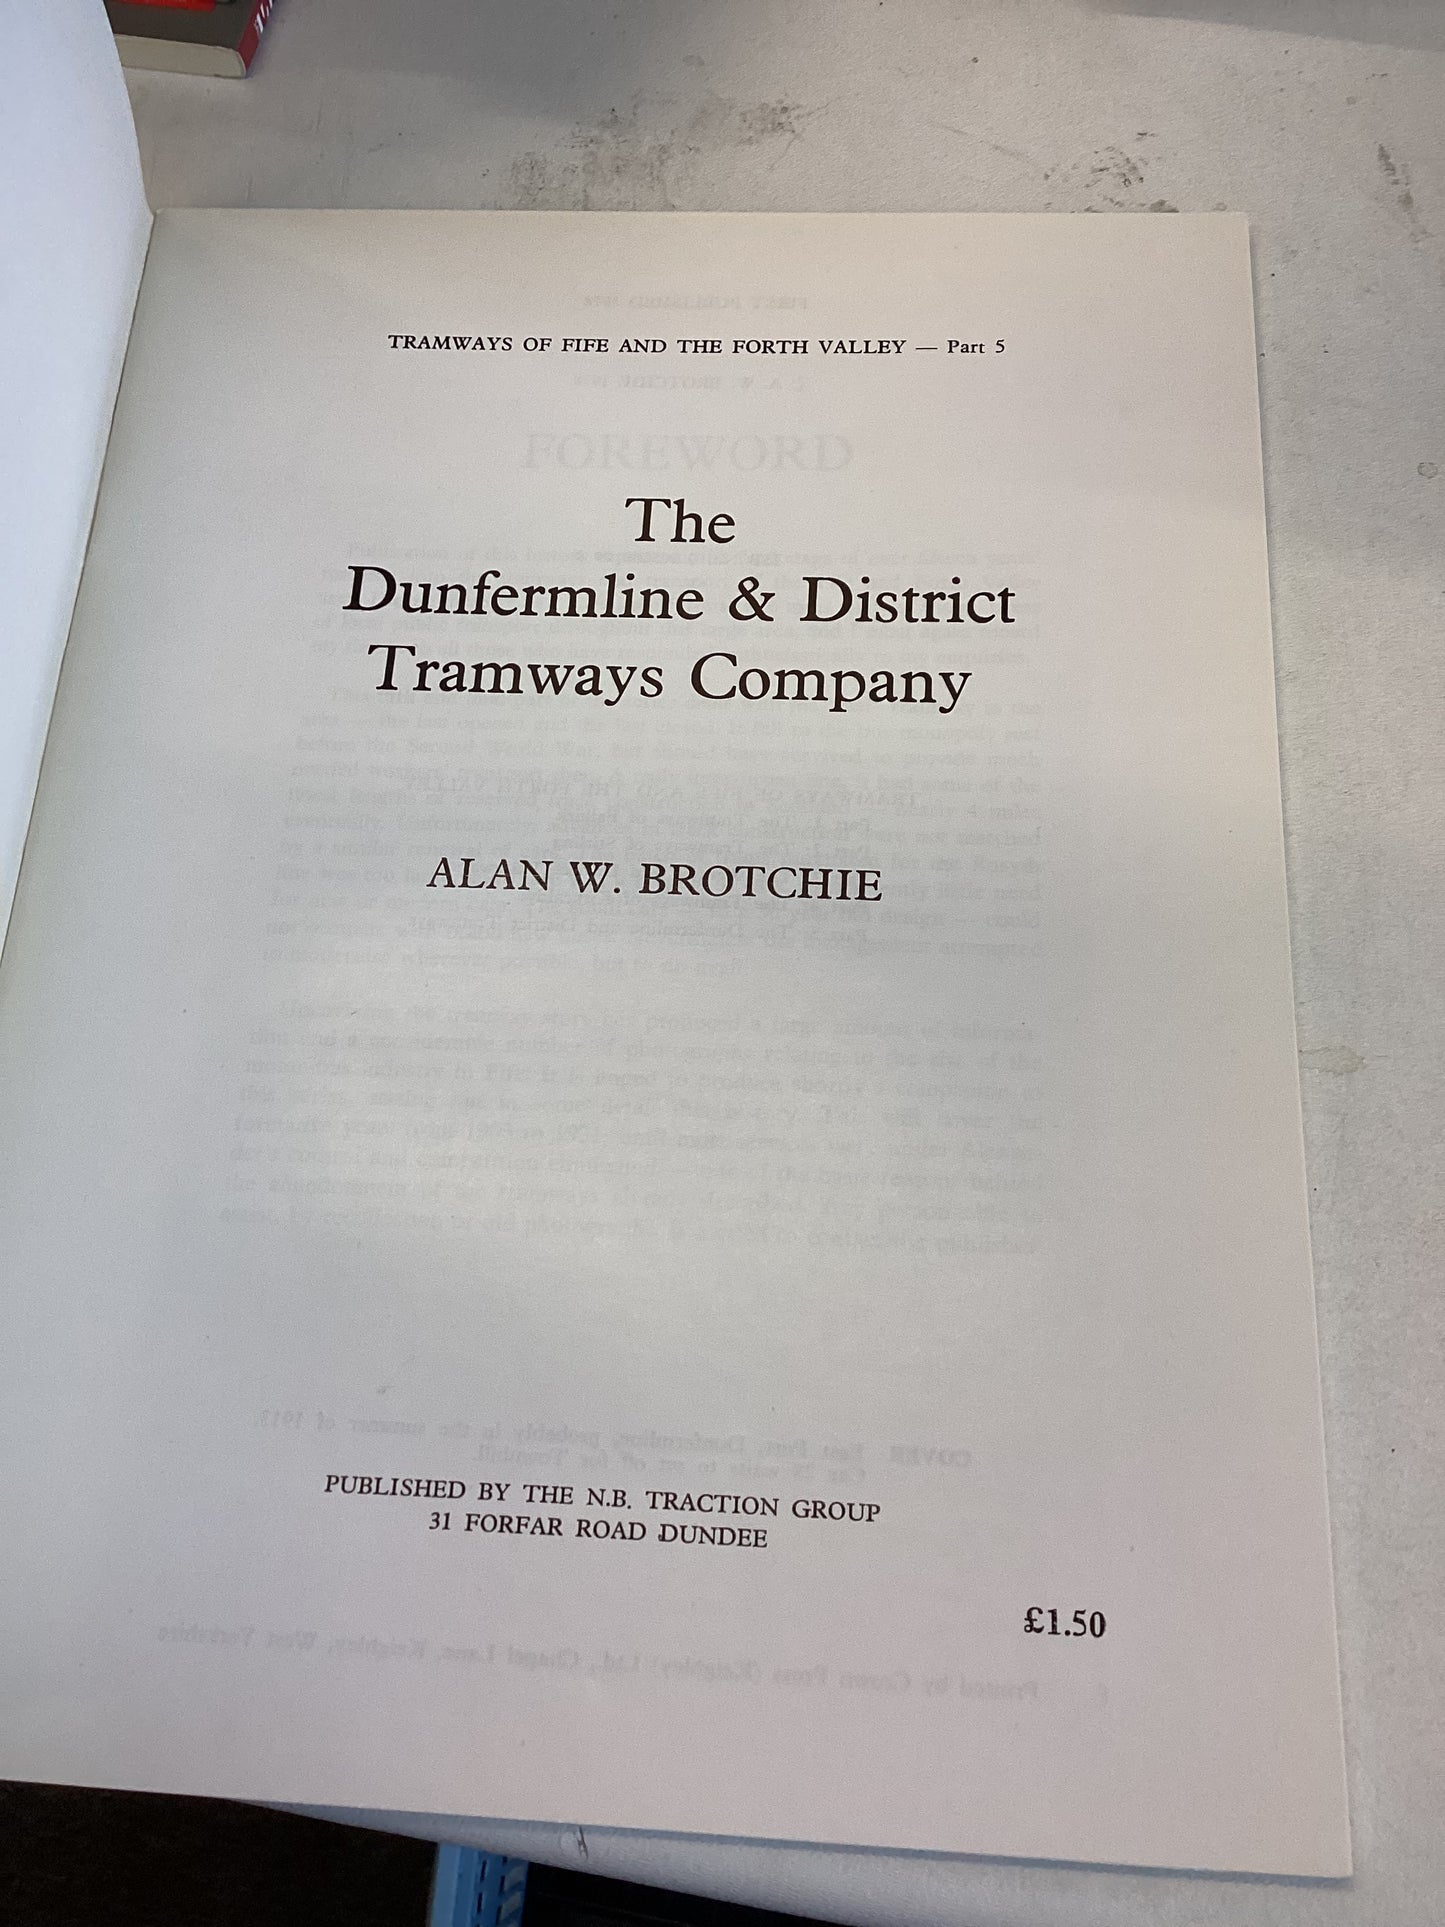 The Dunfermline & District Tramways Company Alan W Brotchie Tramways of Fife and The Forth Valley